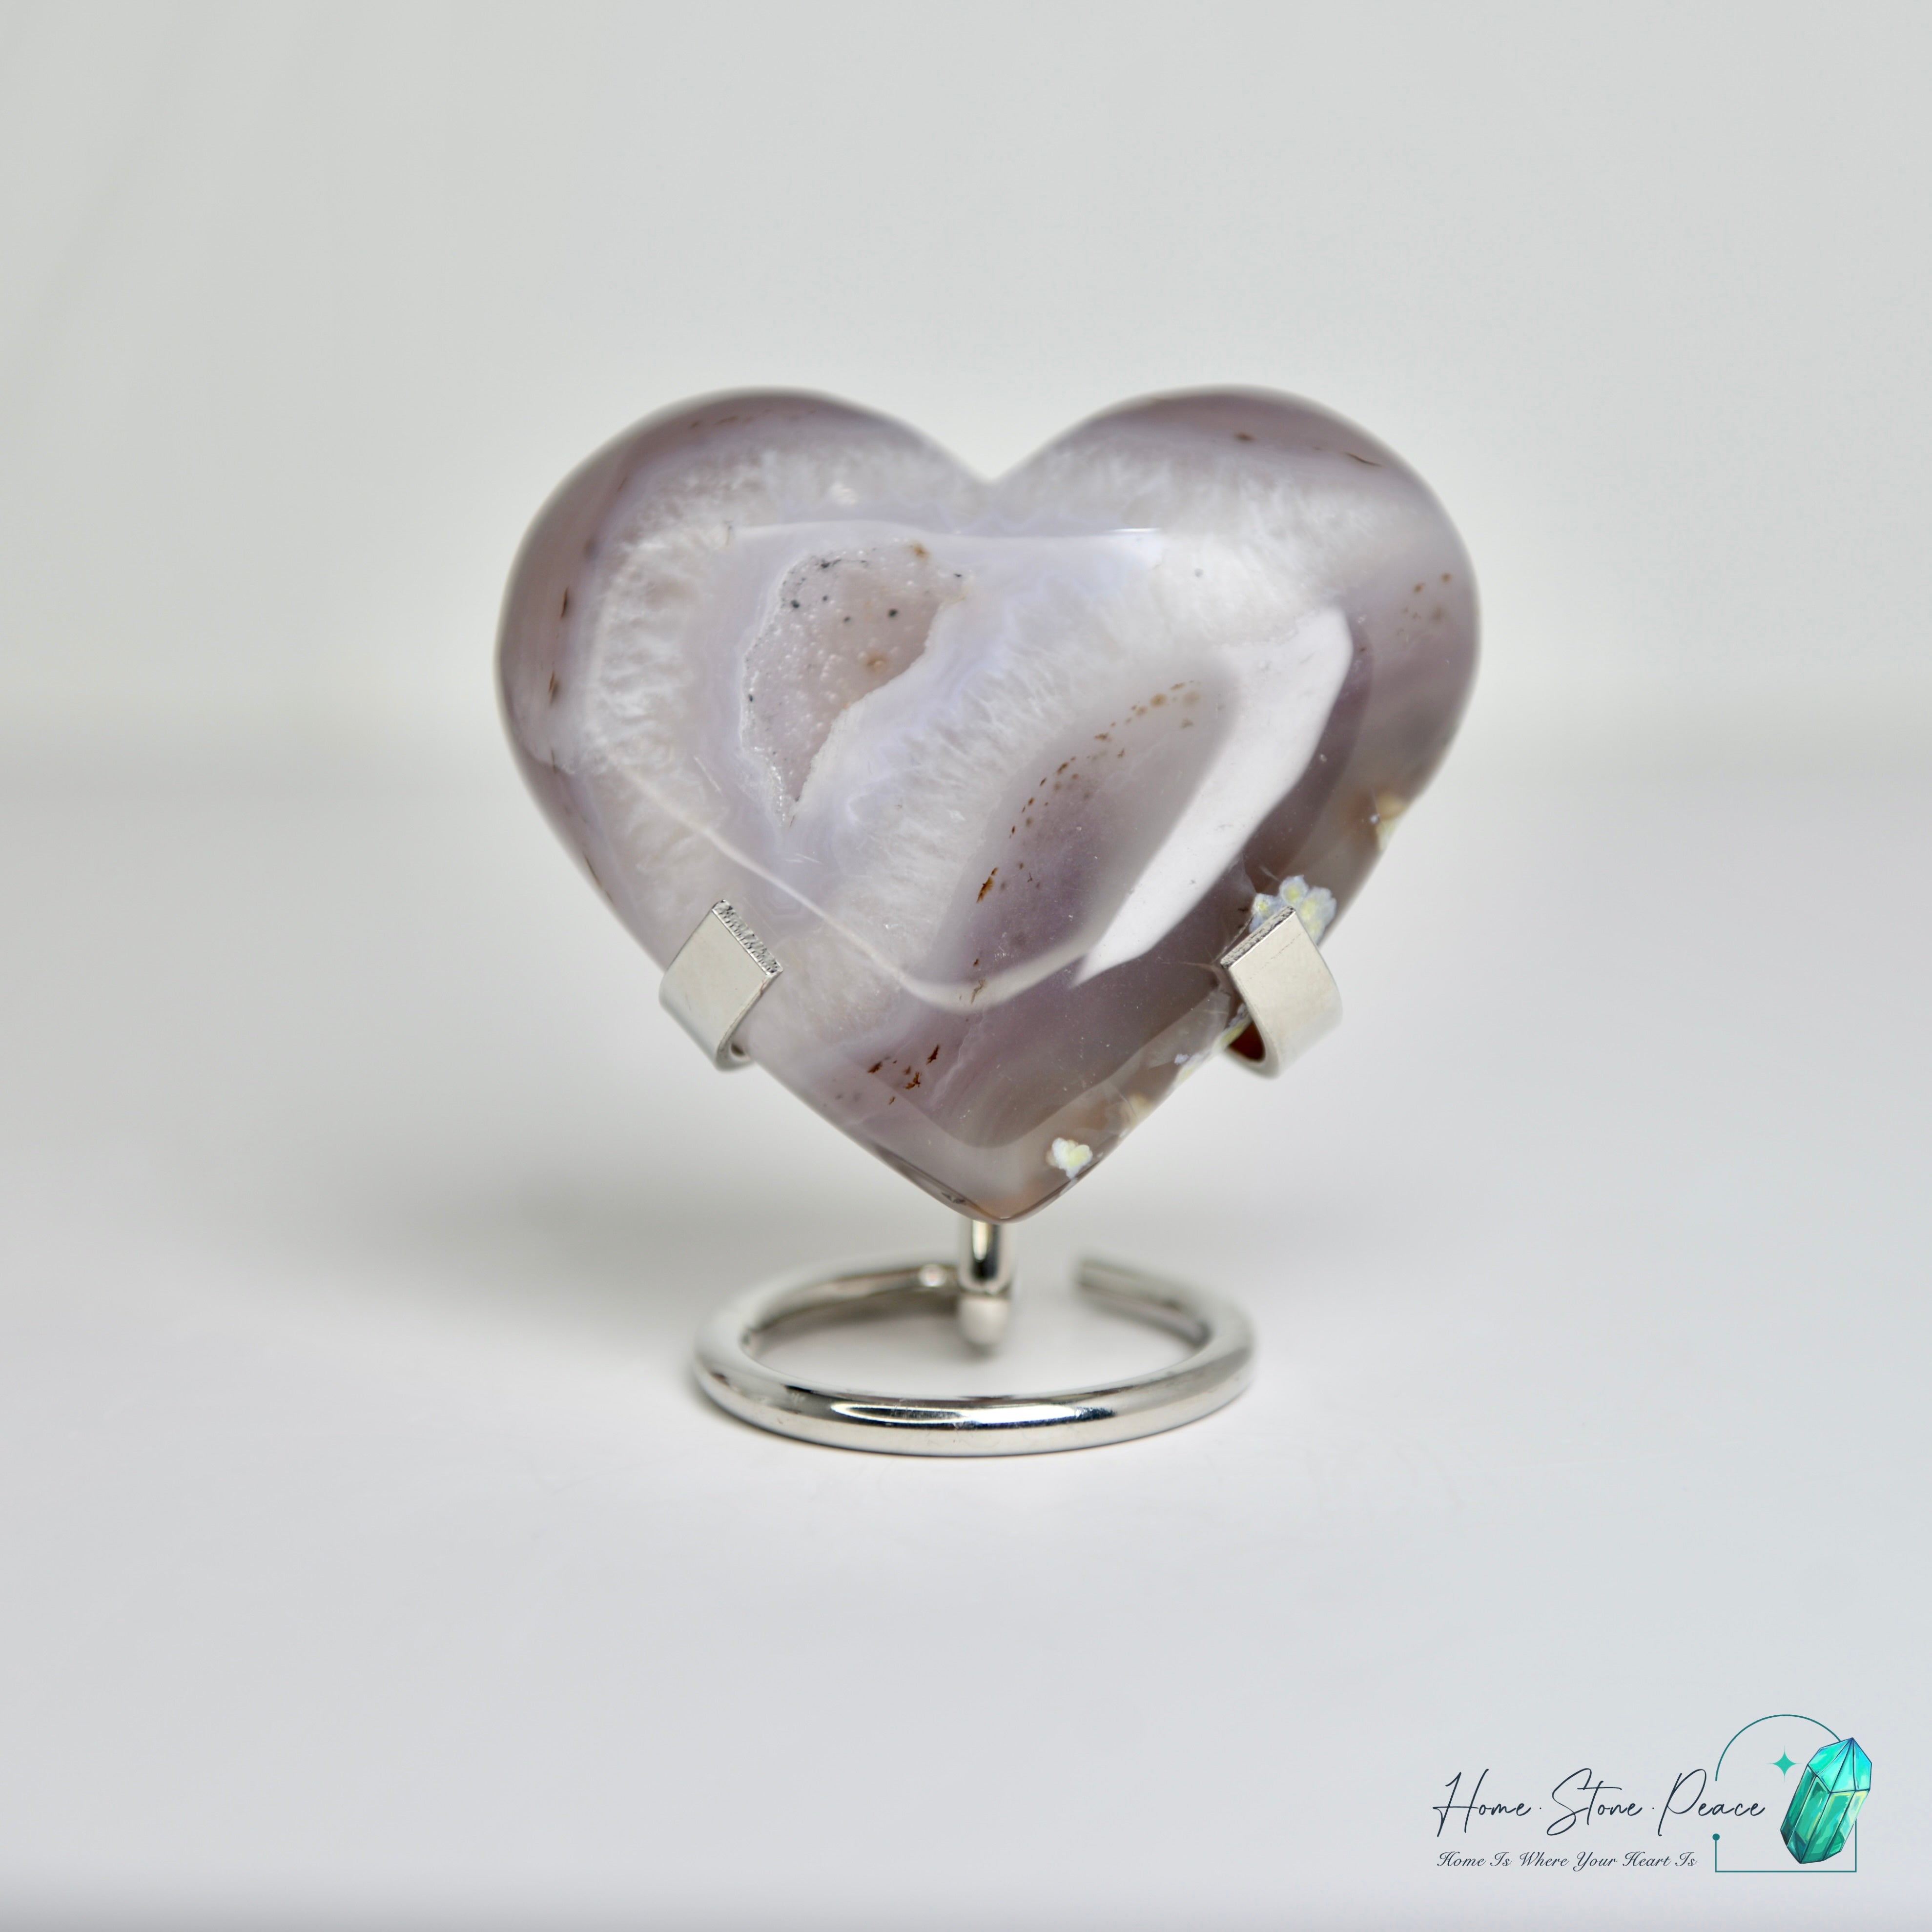 Agate Geode Heart 瑪瑙心